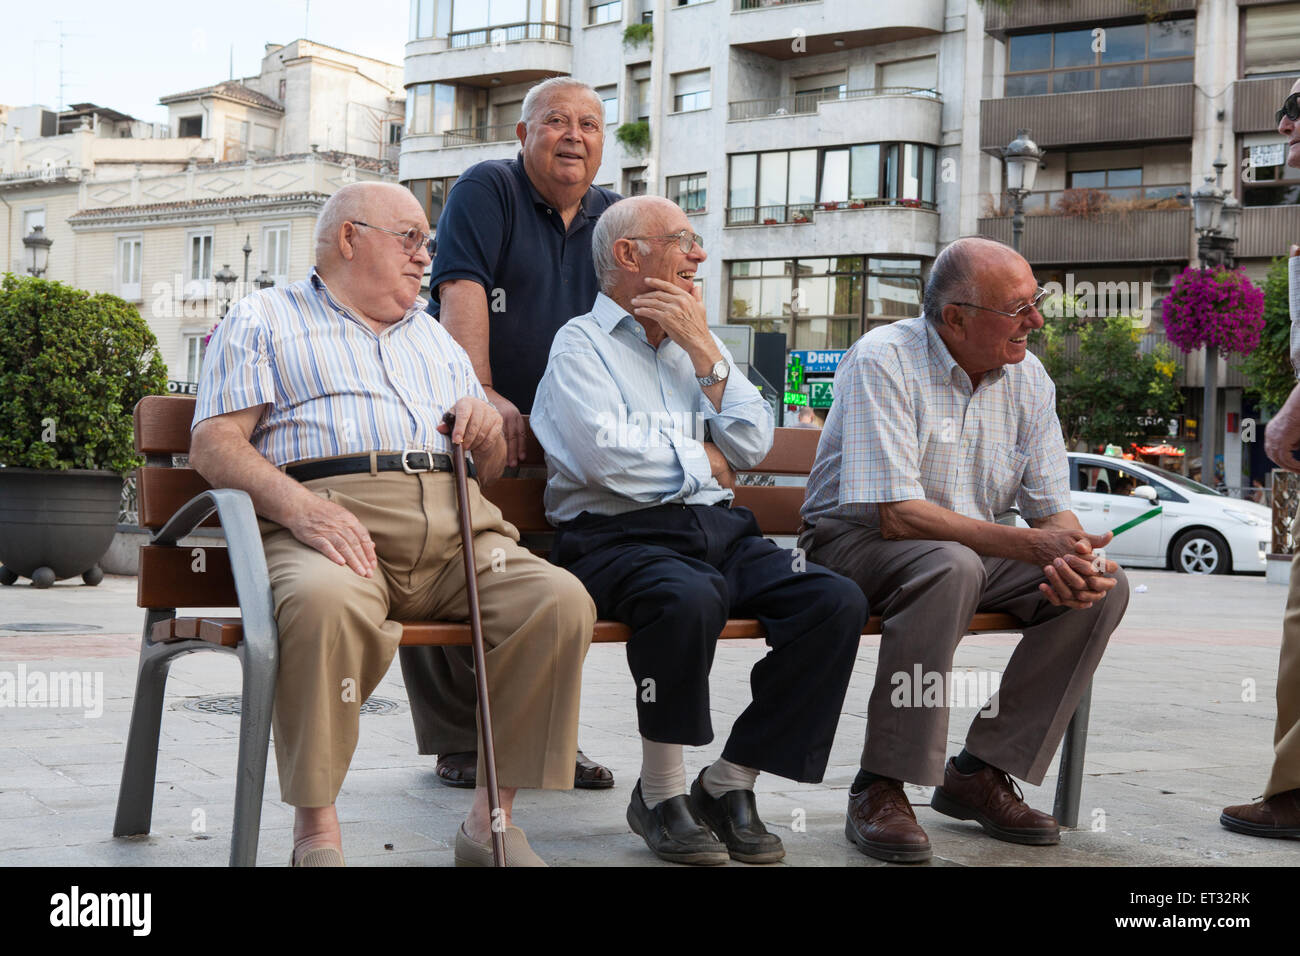 A group of men enjoying an evening get-together on a bench in Puerta Real in Granada Stock Photo